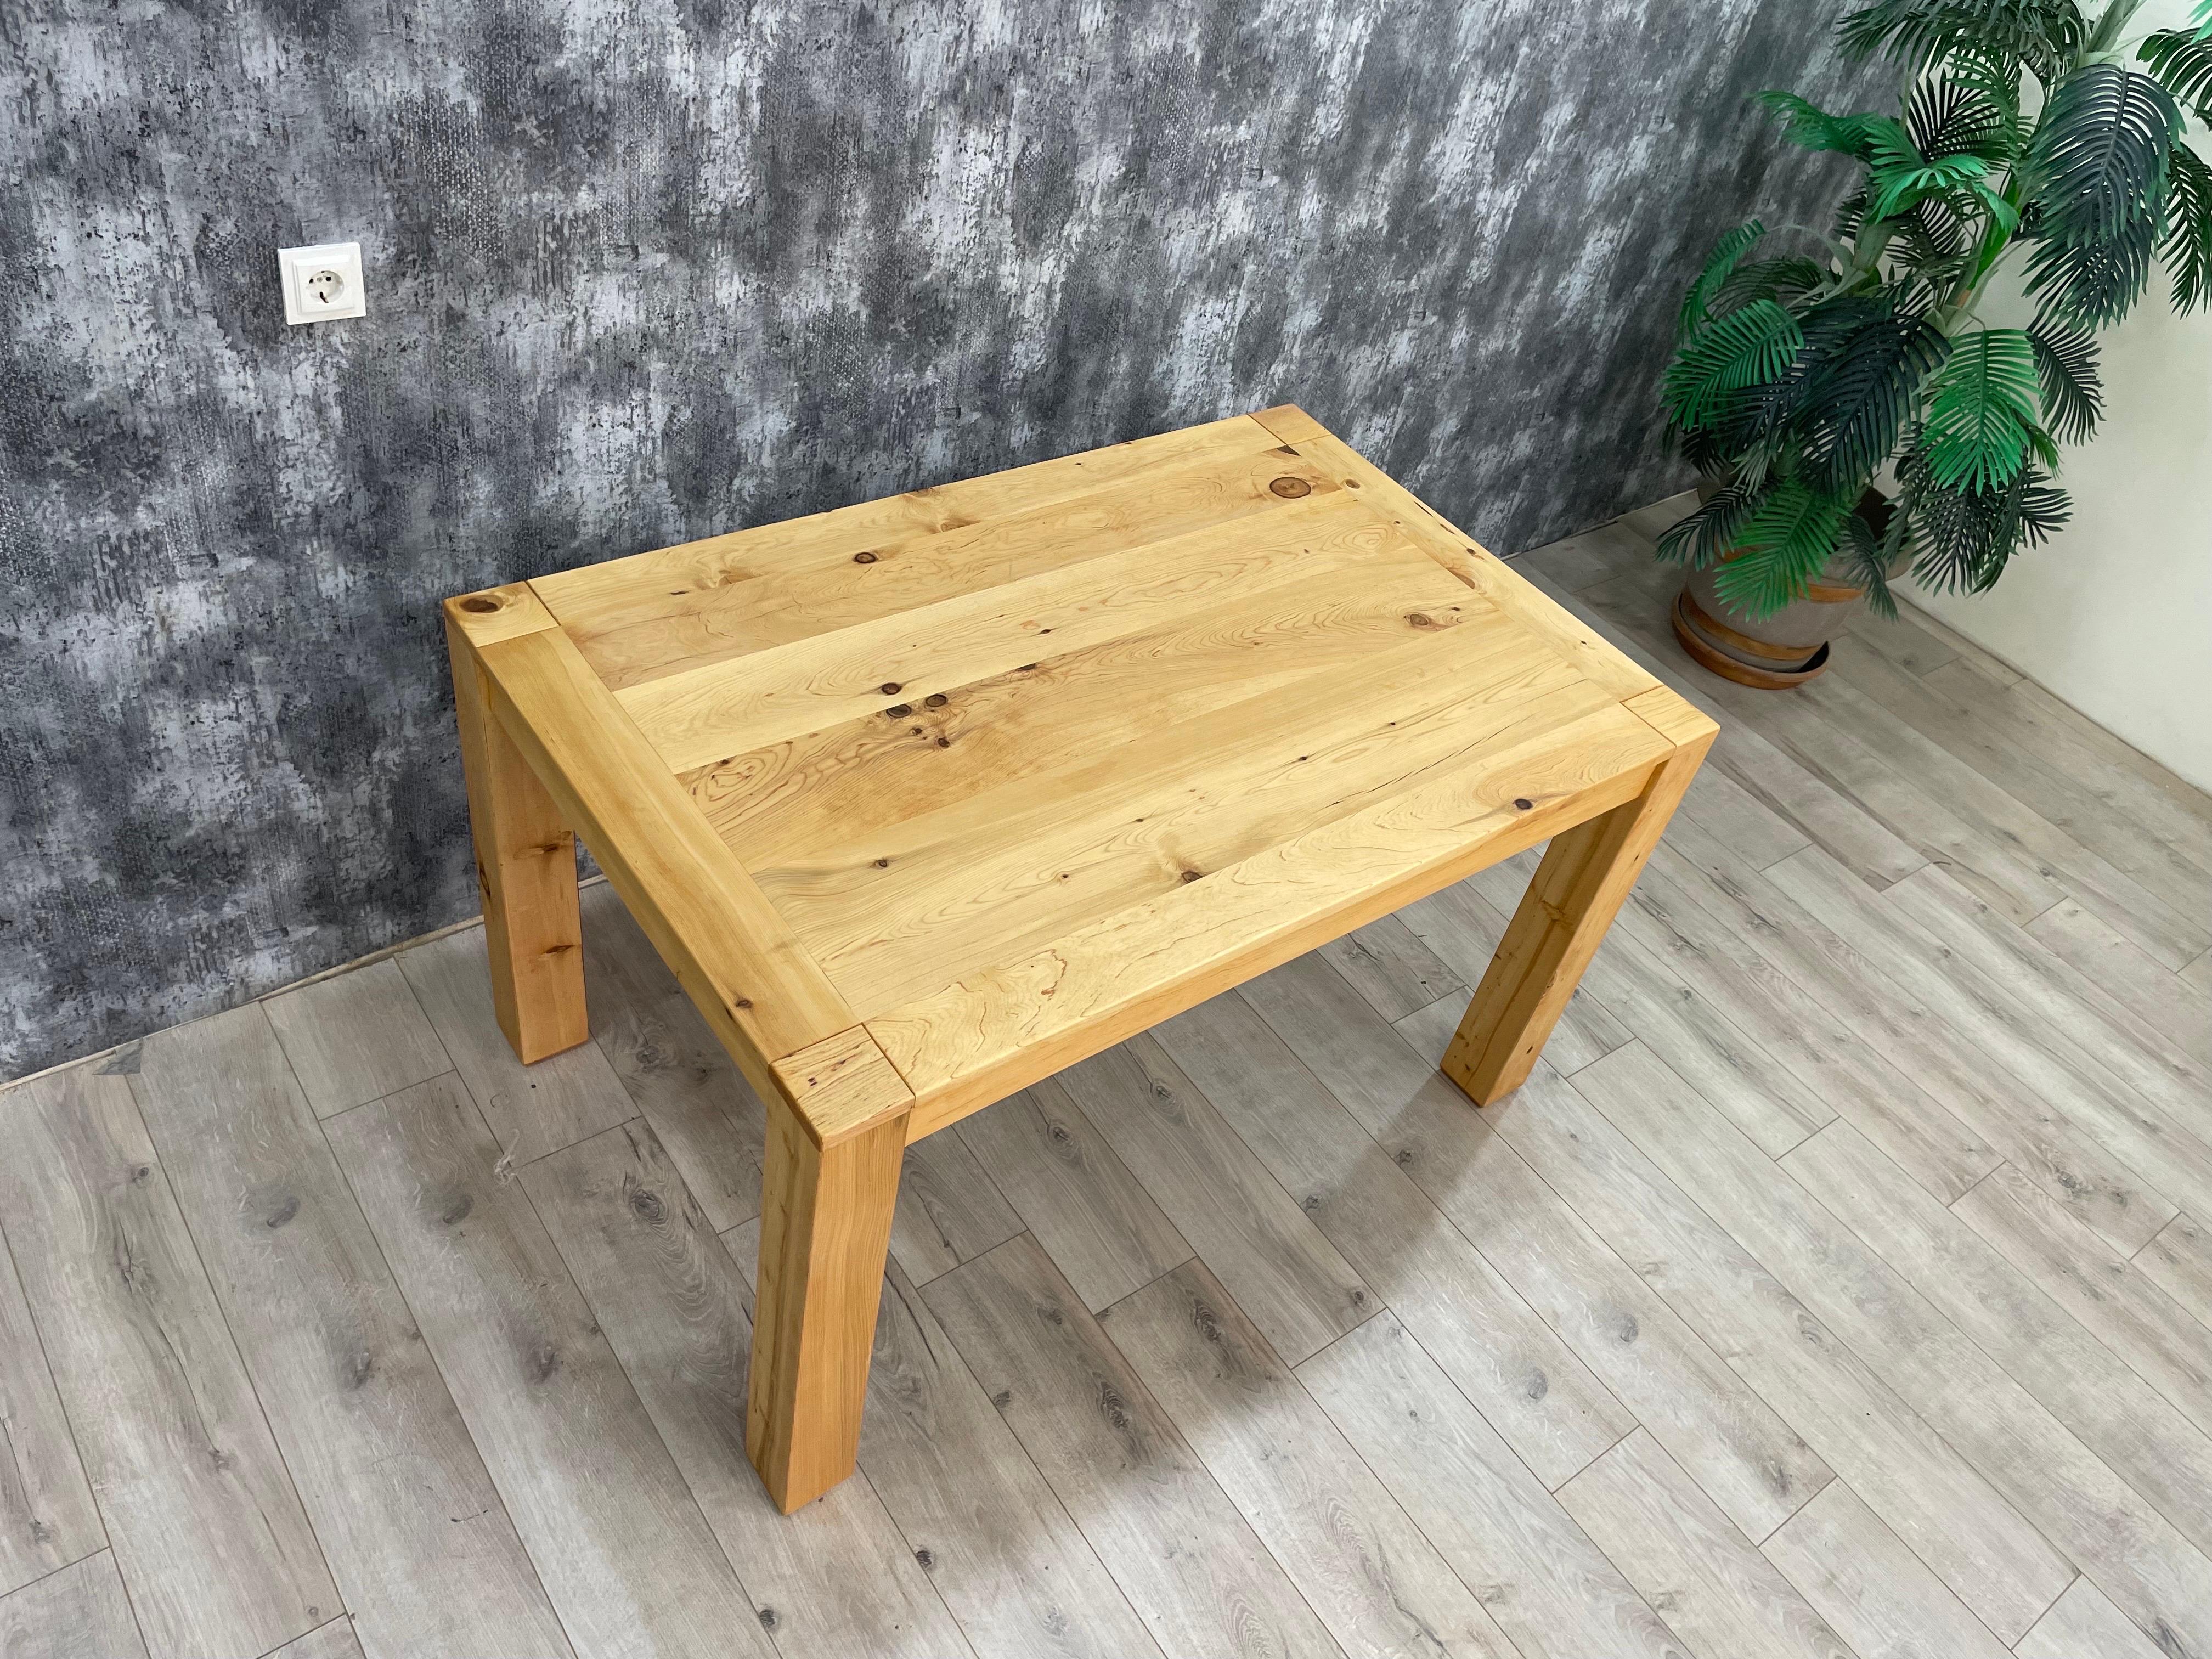 Arasta can be a good choice for your Scandinavian Modern style living room if you prefer to have your dining table in solid wood. Cedar wood has a light color tone, decay- and weather resistant and its scent repels insects. 
The best Cedar wood has